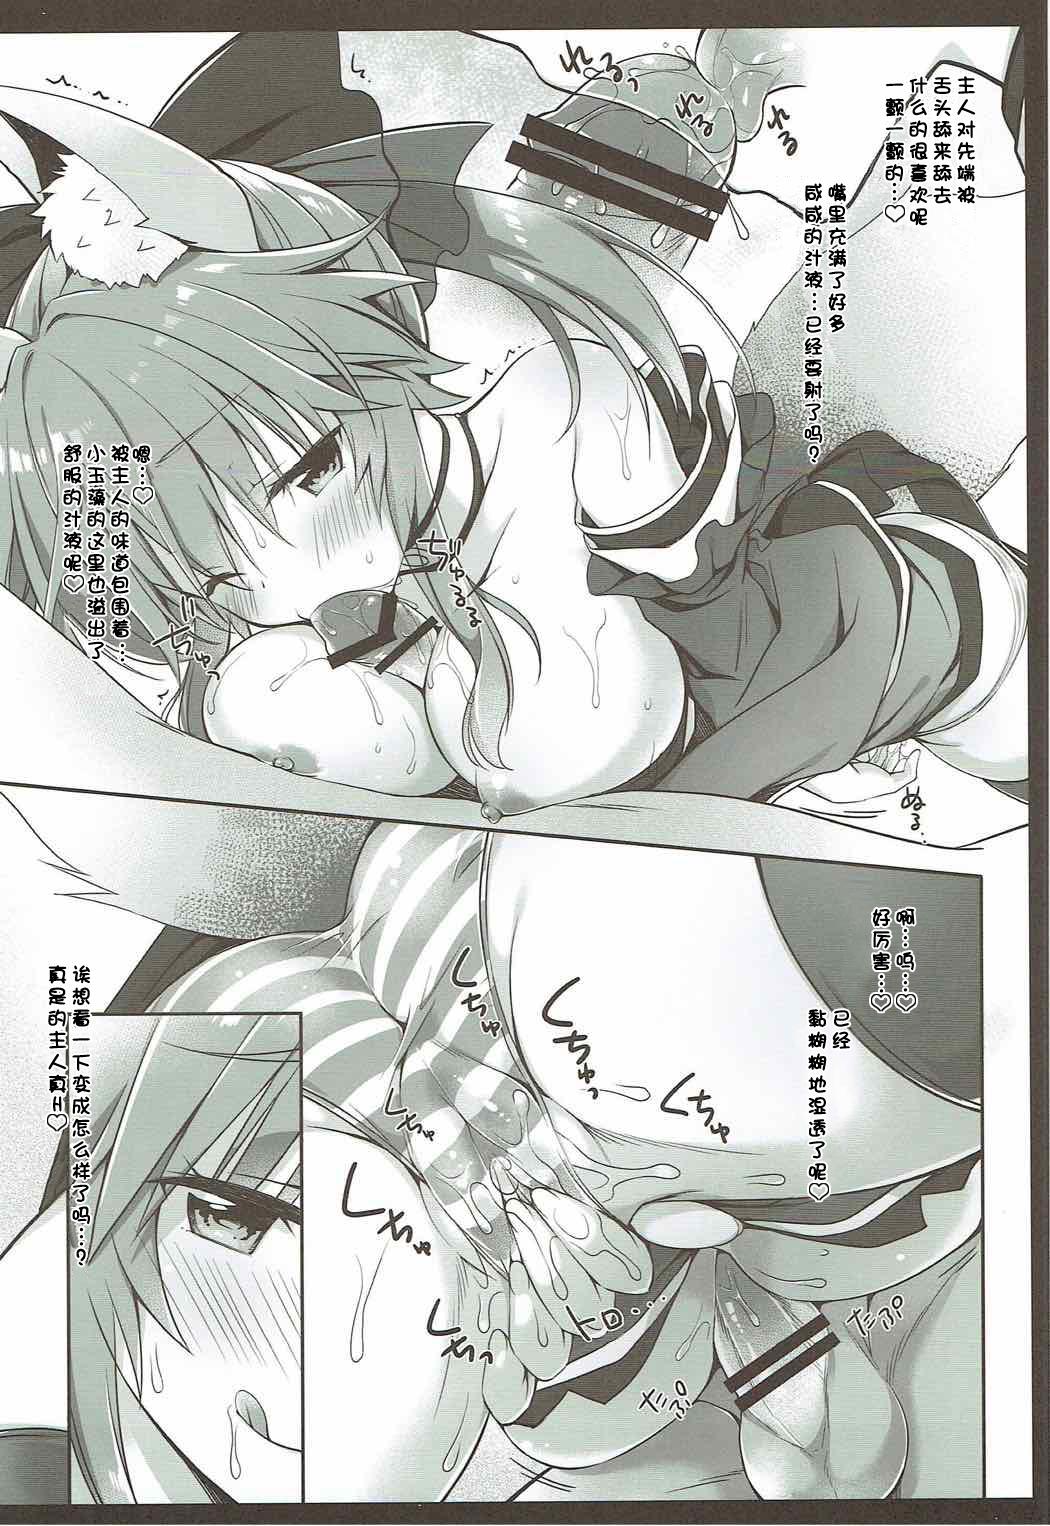 Transex Ore to Tamamo to My Room - Fate grand order Gape - Page 5